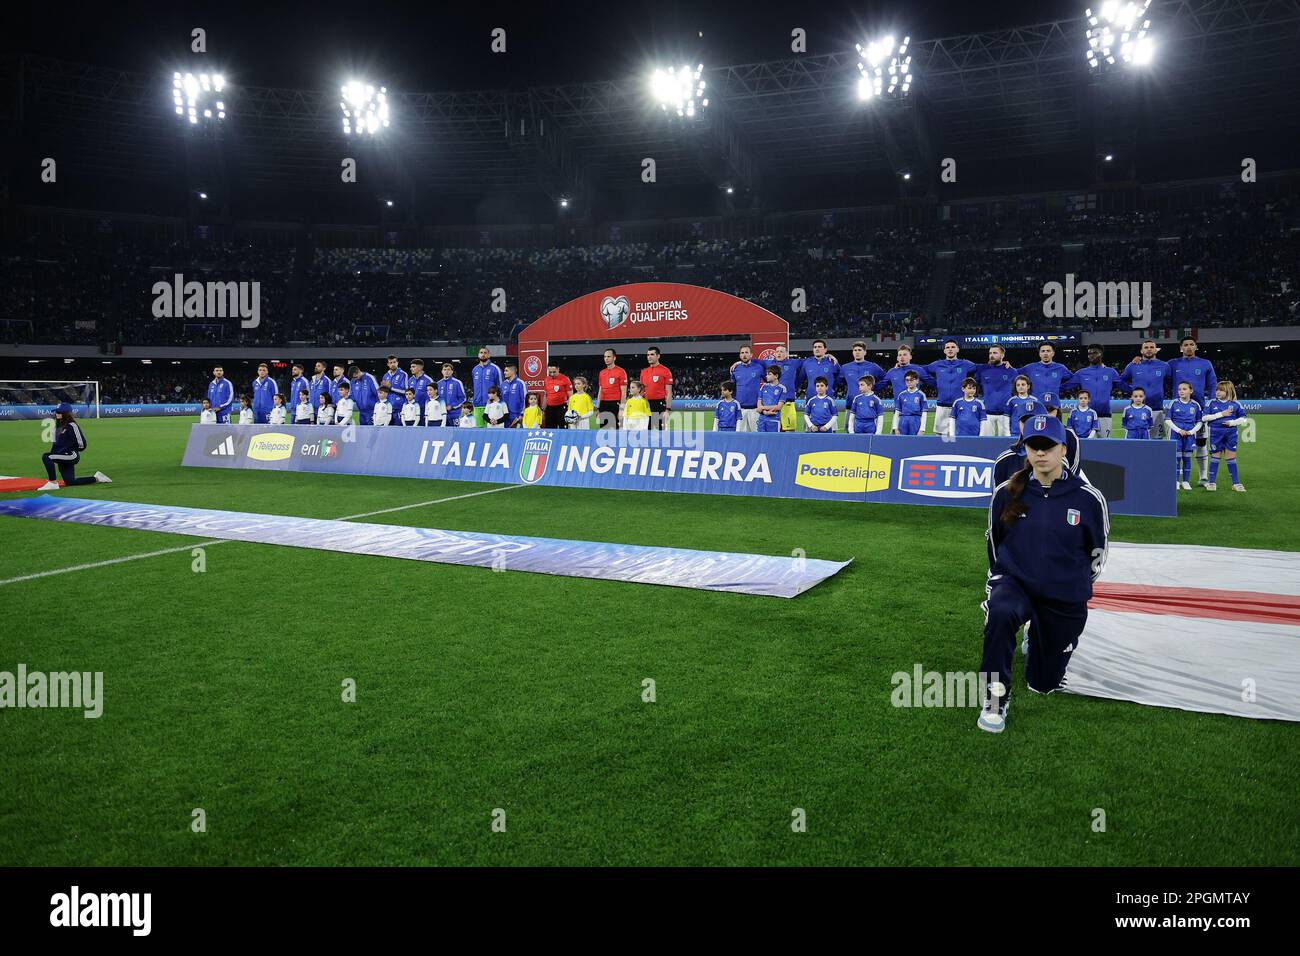 Naples, Italy. 23rd Mar, 2023. Italy and England players pose for a team photo during the UEFA EURO2024 European Championship Qualification Group C football match between Italy and England at Diego Armando Maradona stadium in Napoli (Italy), March 23rd, 2023. Photo Cesare Purini/Insidefoto Credit: Insidefoto di andrea staccioli/Alamy Live News Stock Photo